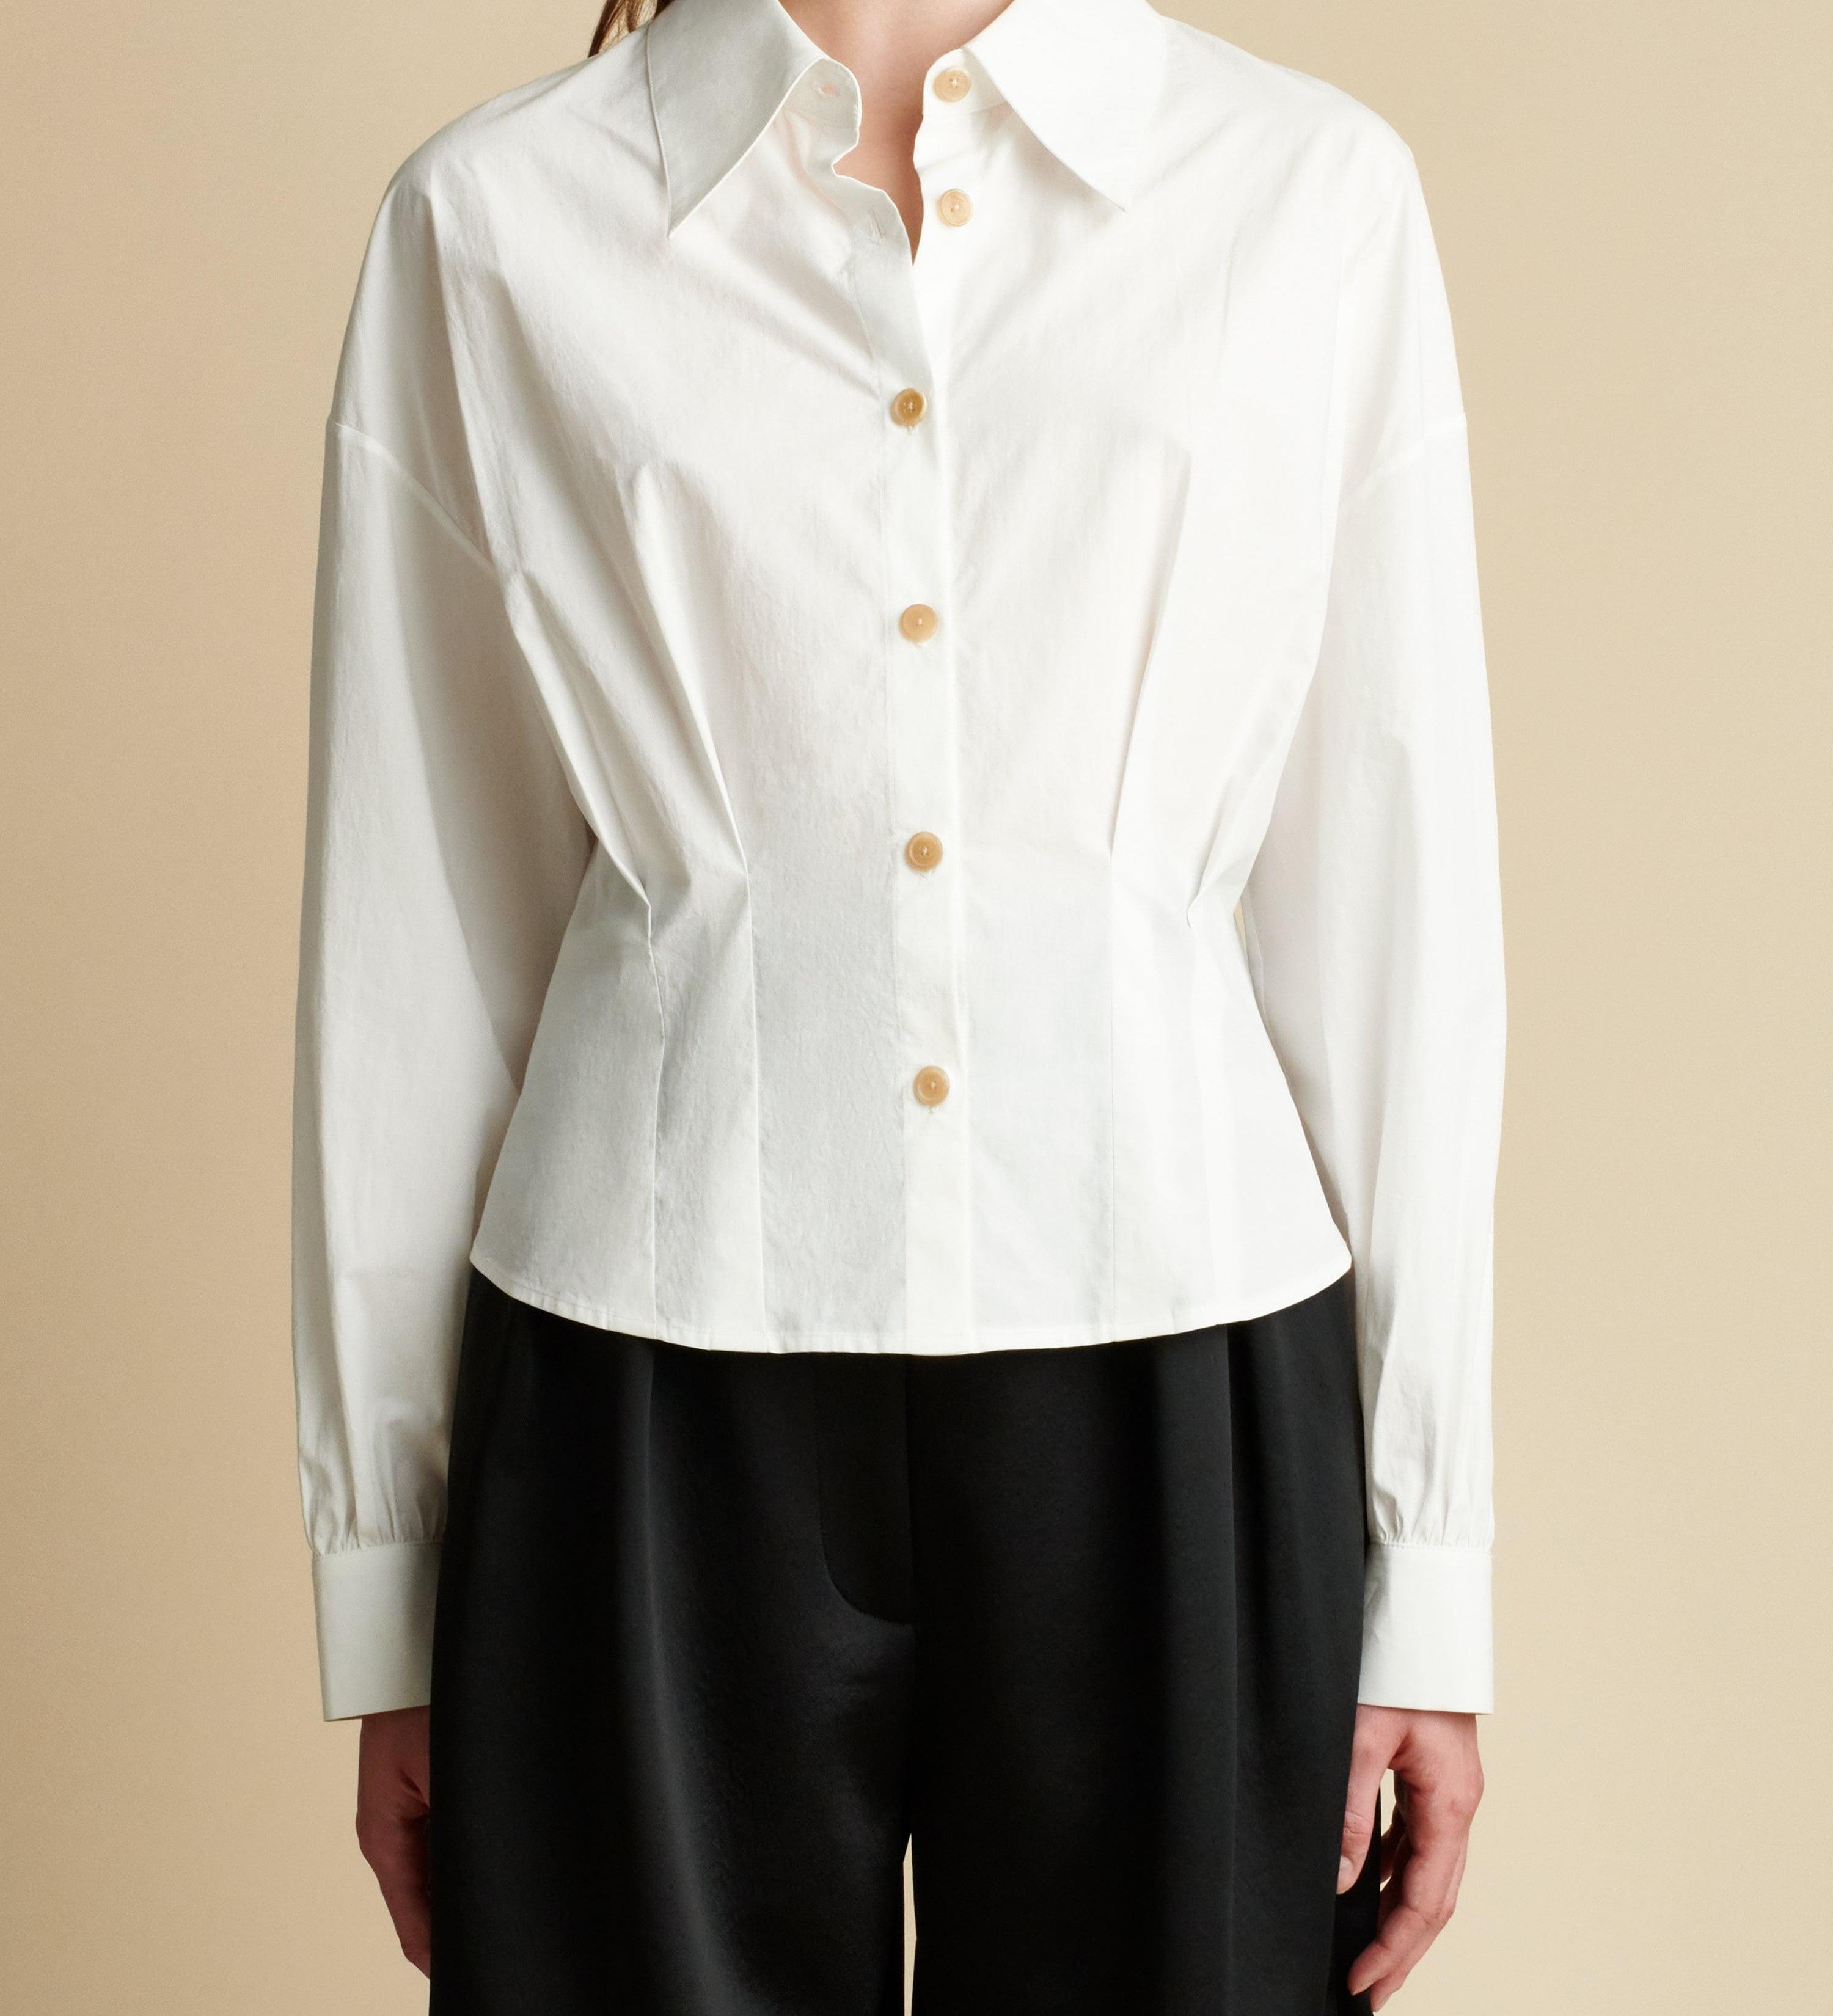 The Arwin Top in White - The Iconic Issue